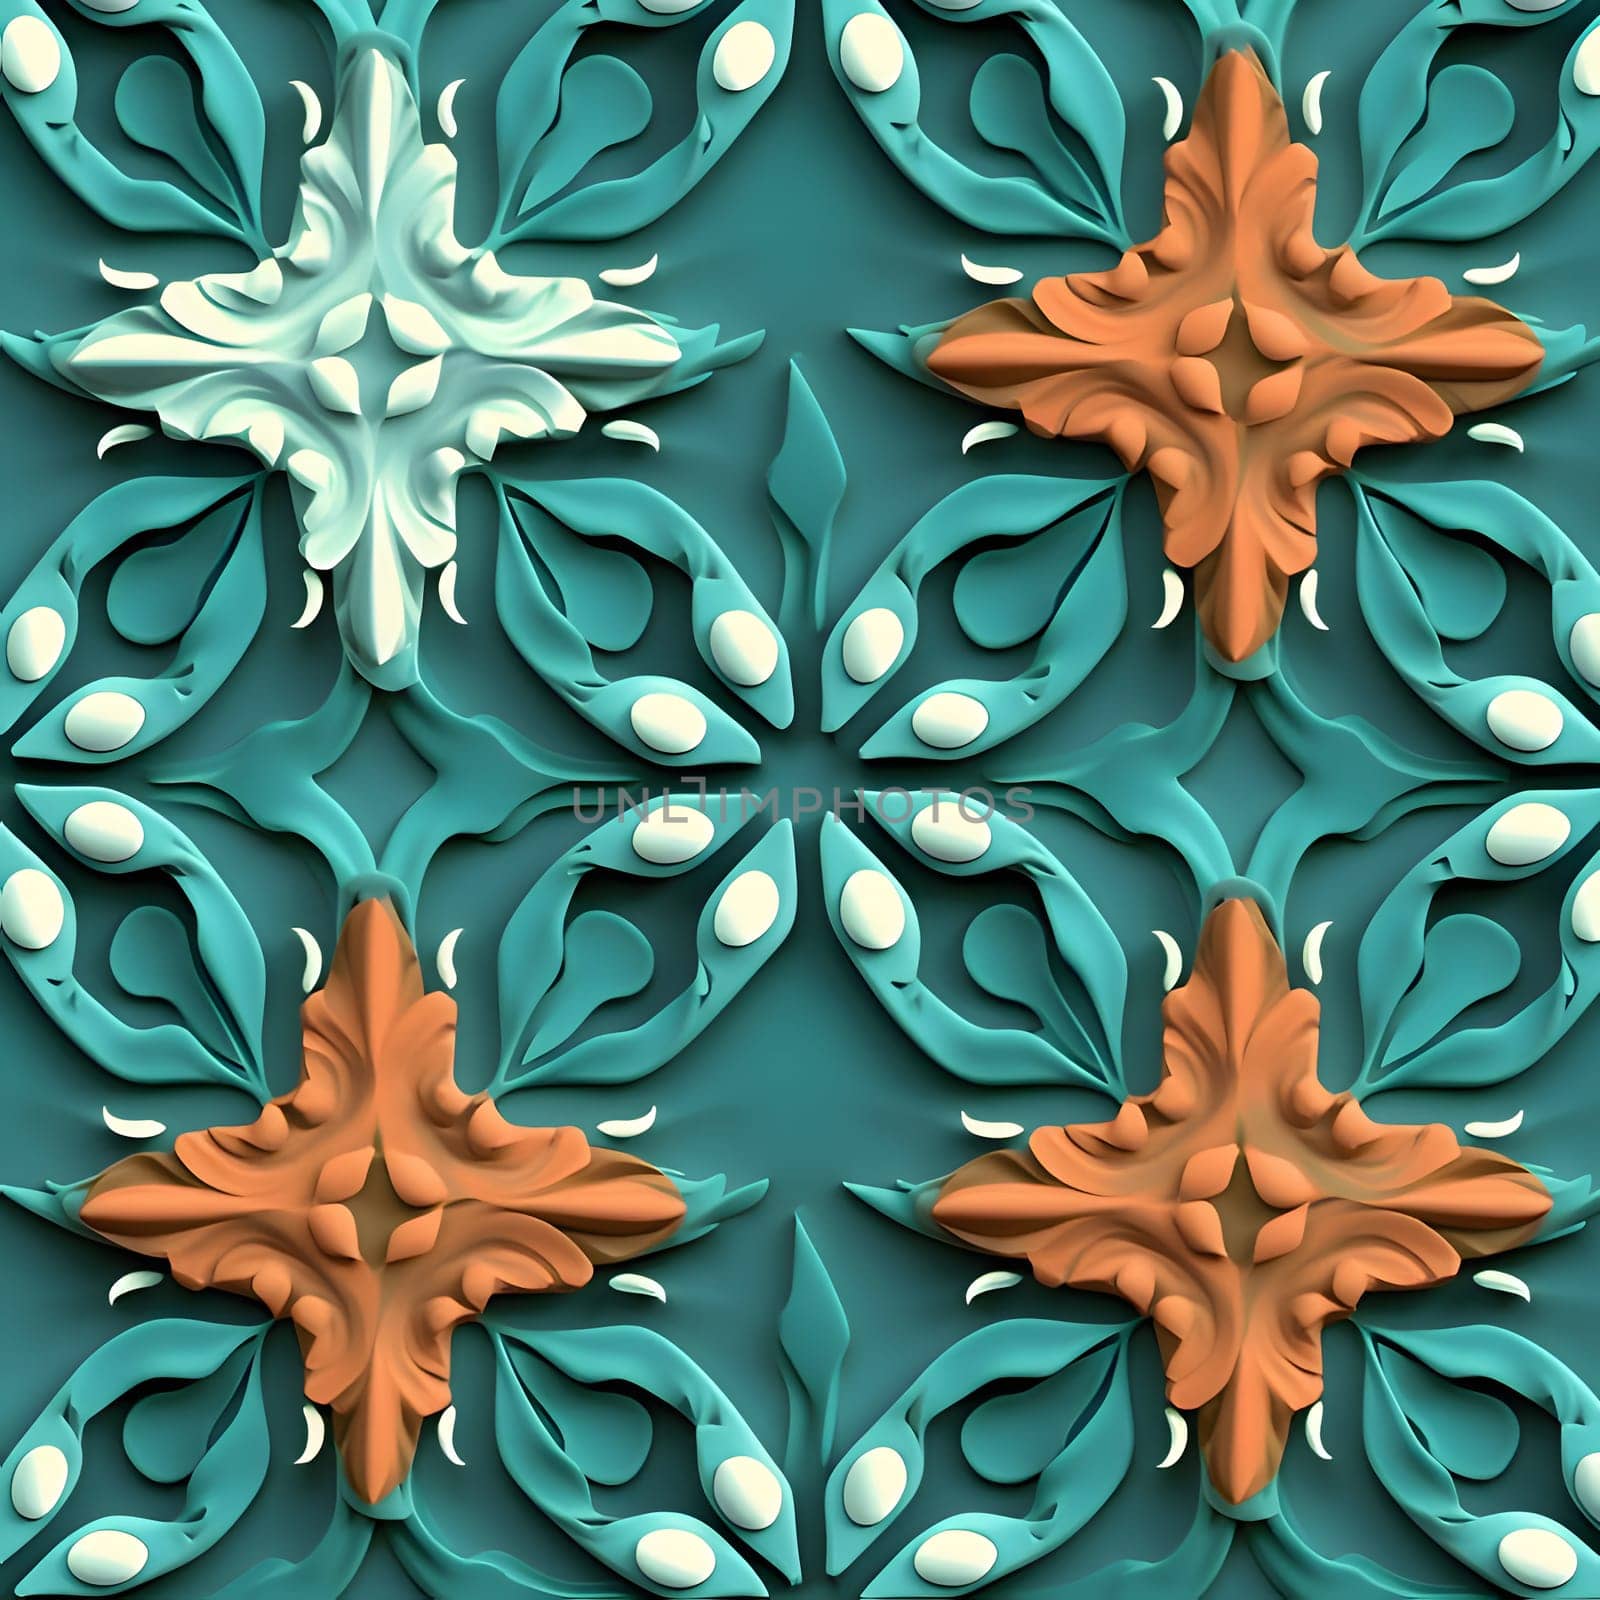 Patterns and banners backgrounds: 3D render of seamless background tile with embossed abstract ornament on leather